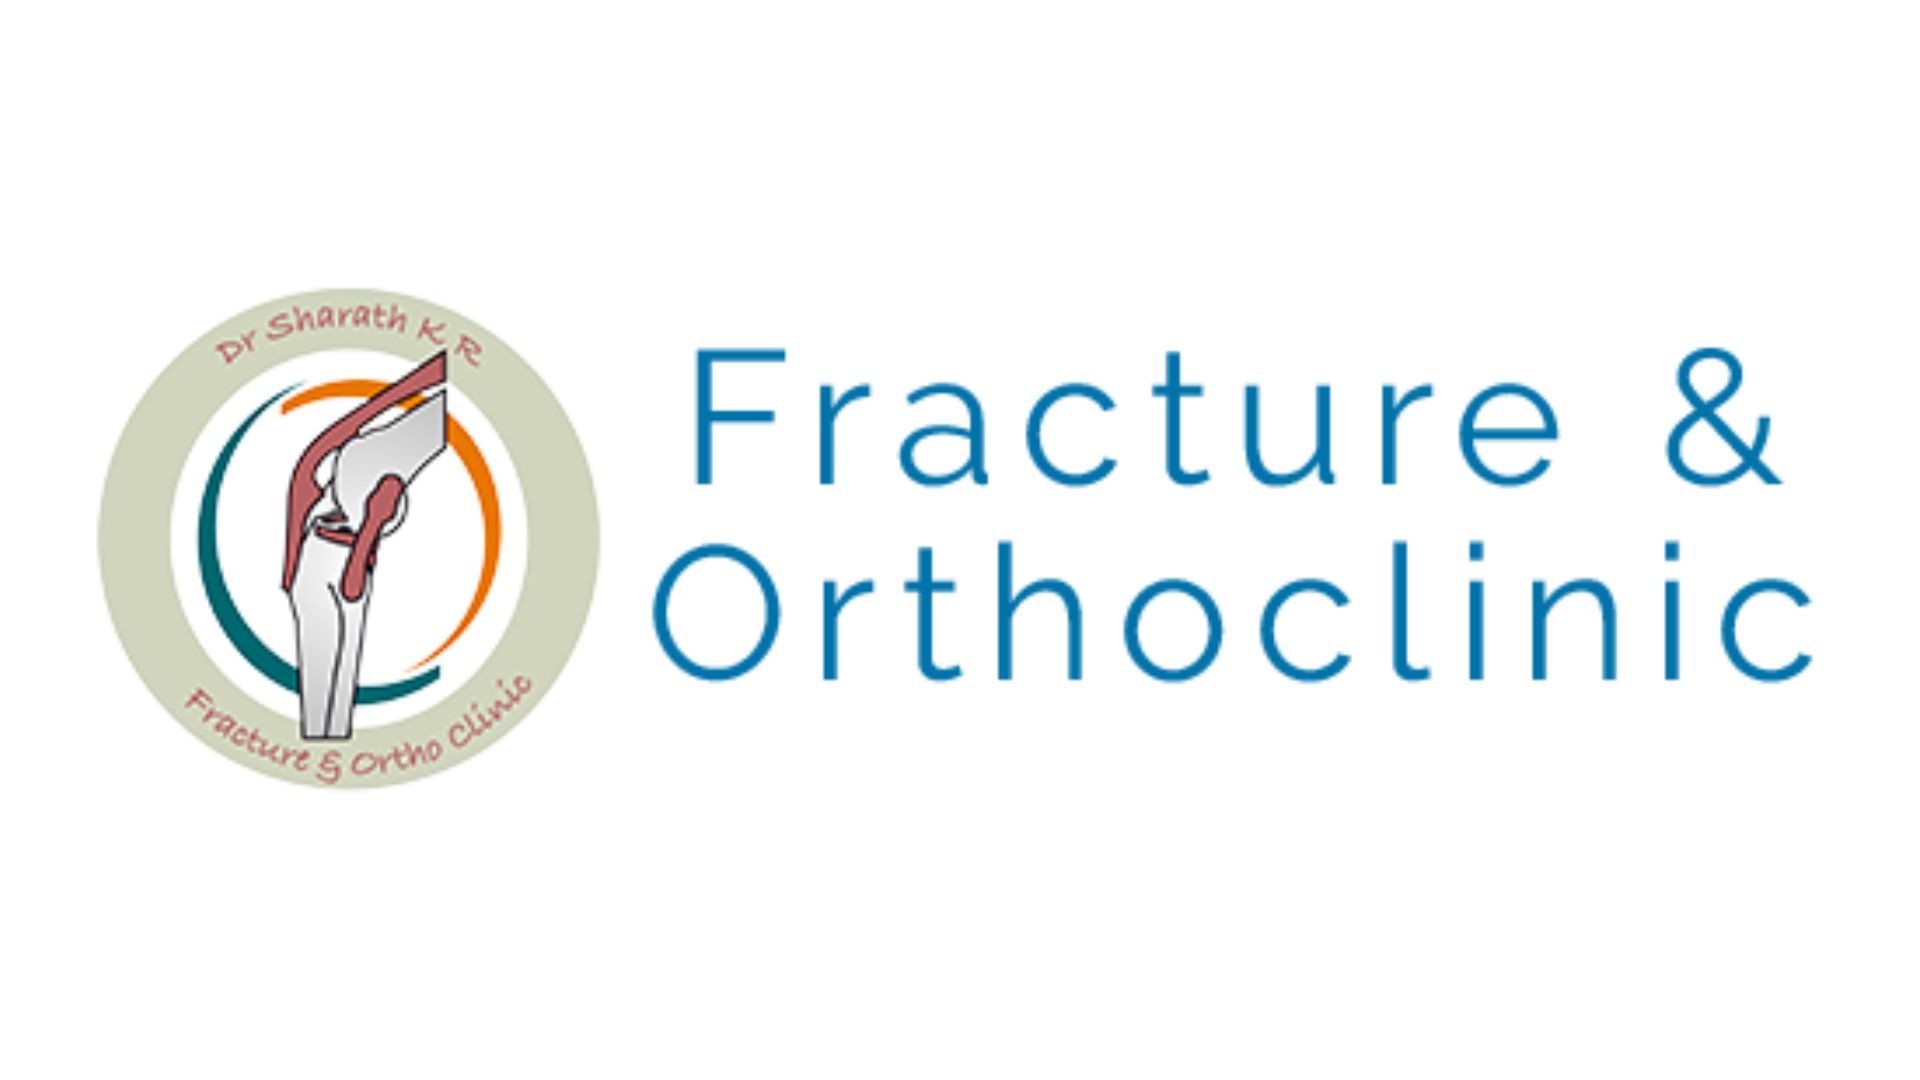 Dr Sharath KR: Fracture & Ortho Clinic